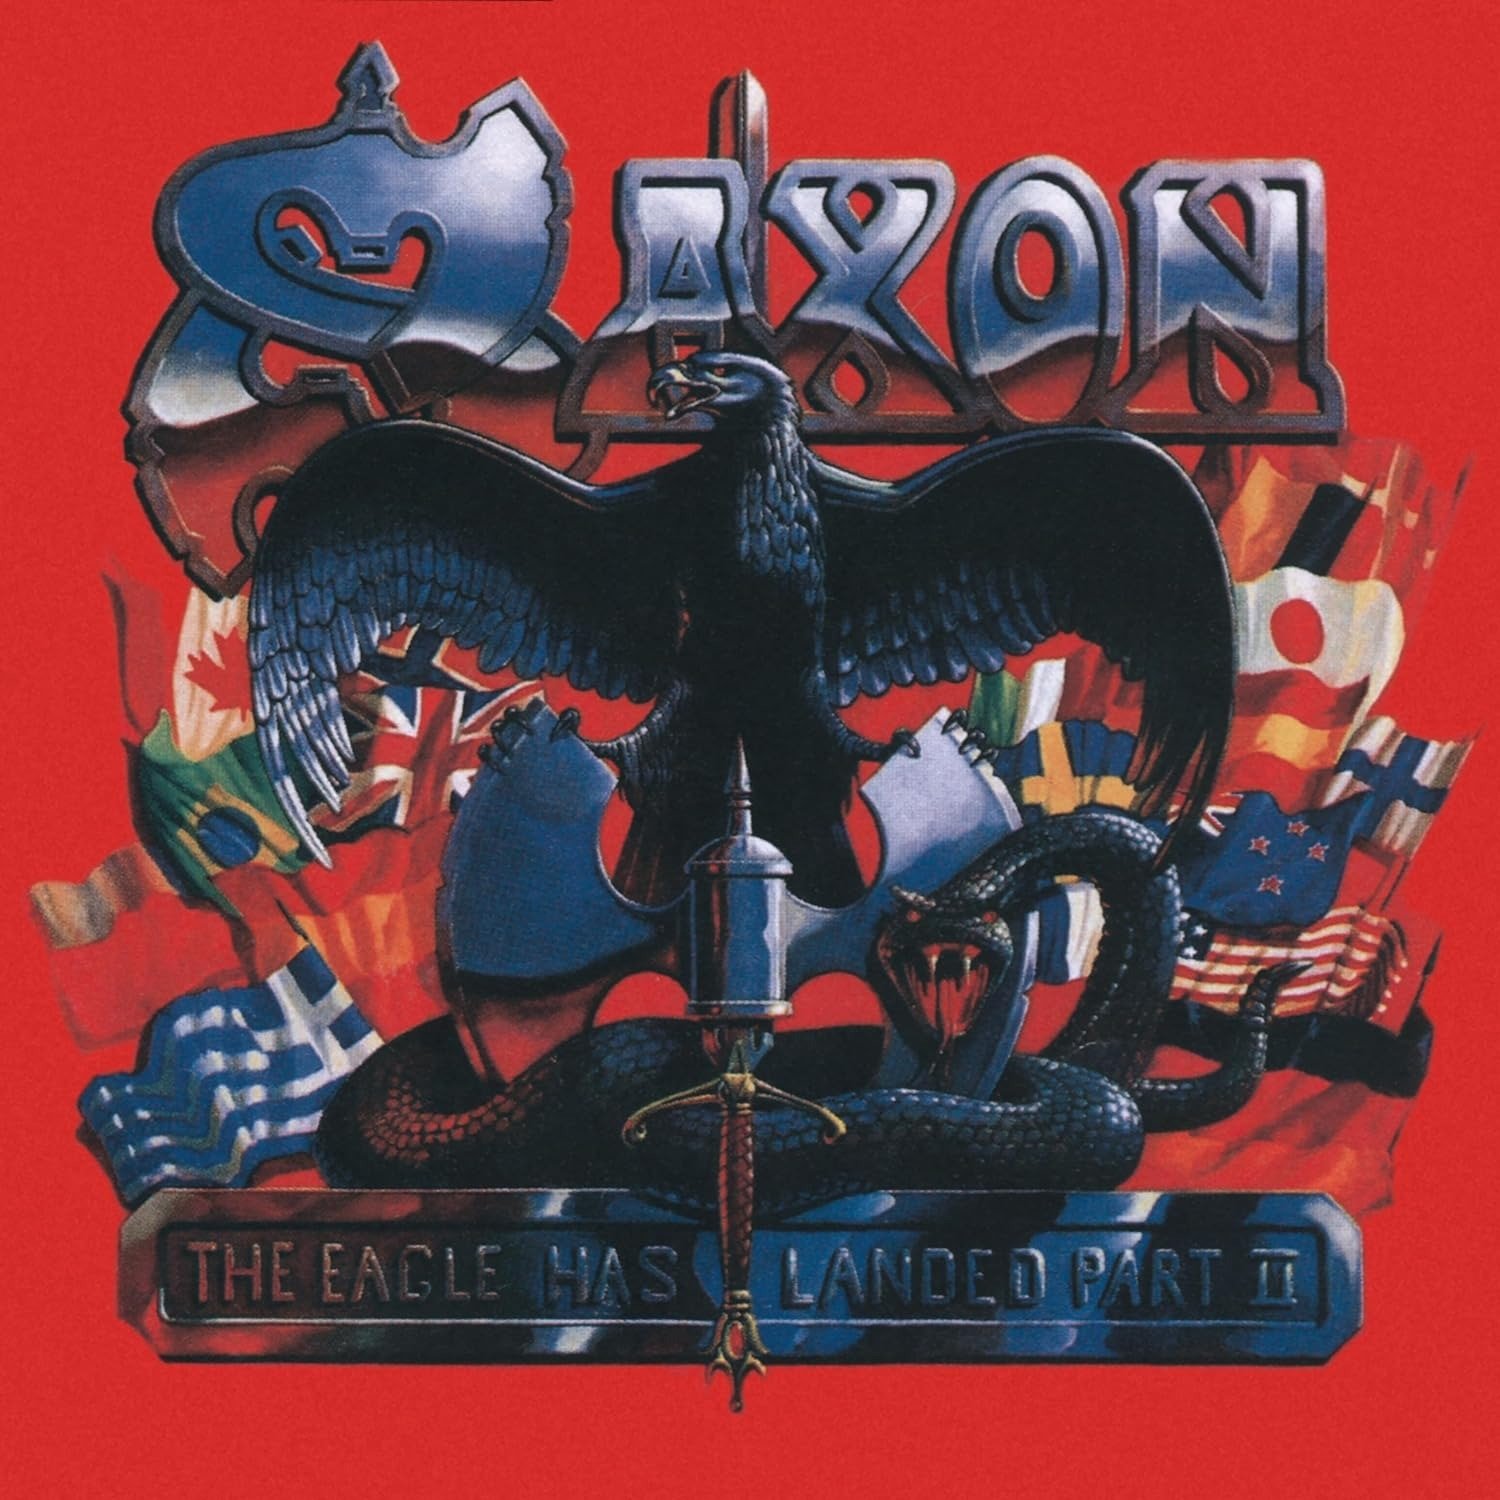 CD Shop - SAXON THE EAGLE HAS LANDED, PART 2 (LIVE IN GERMANY, DECEMBER 1995)